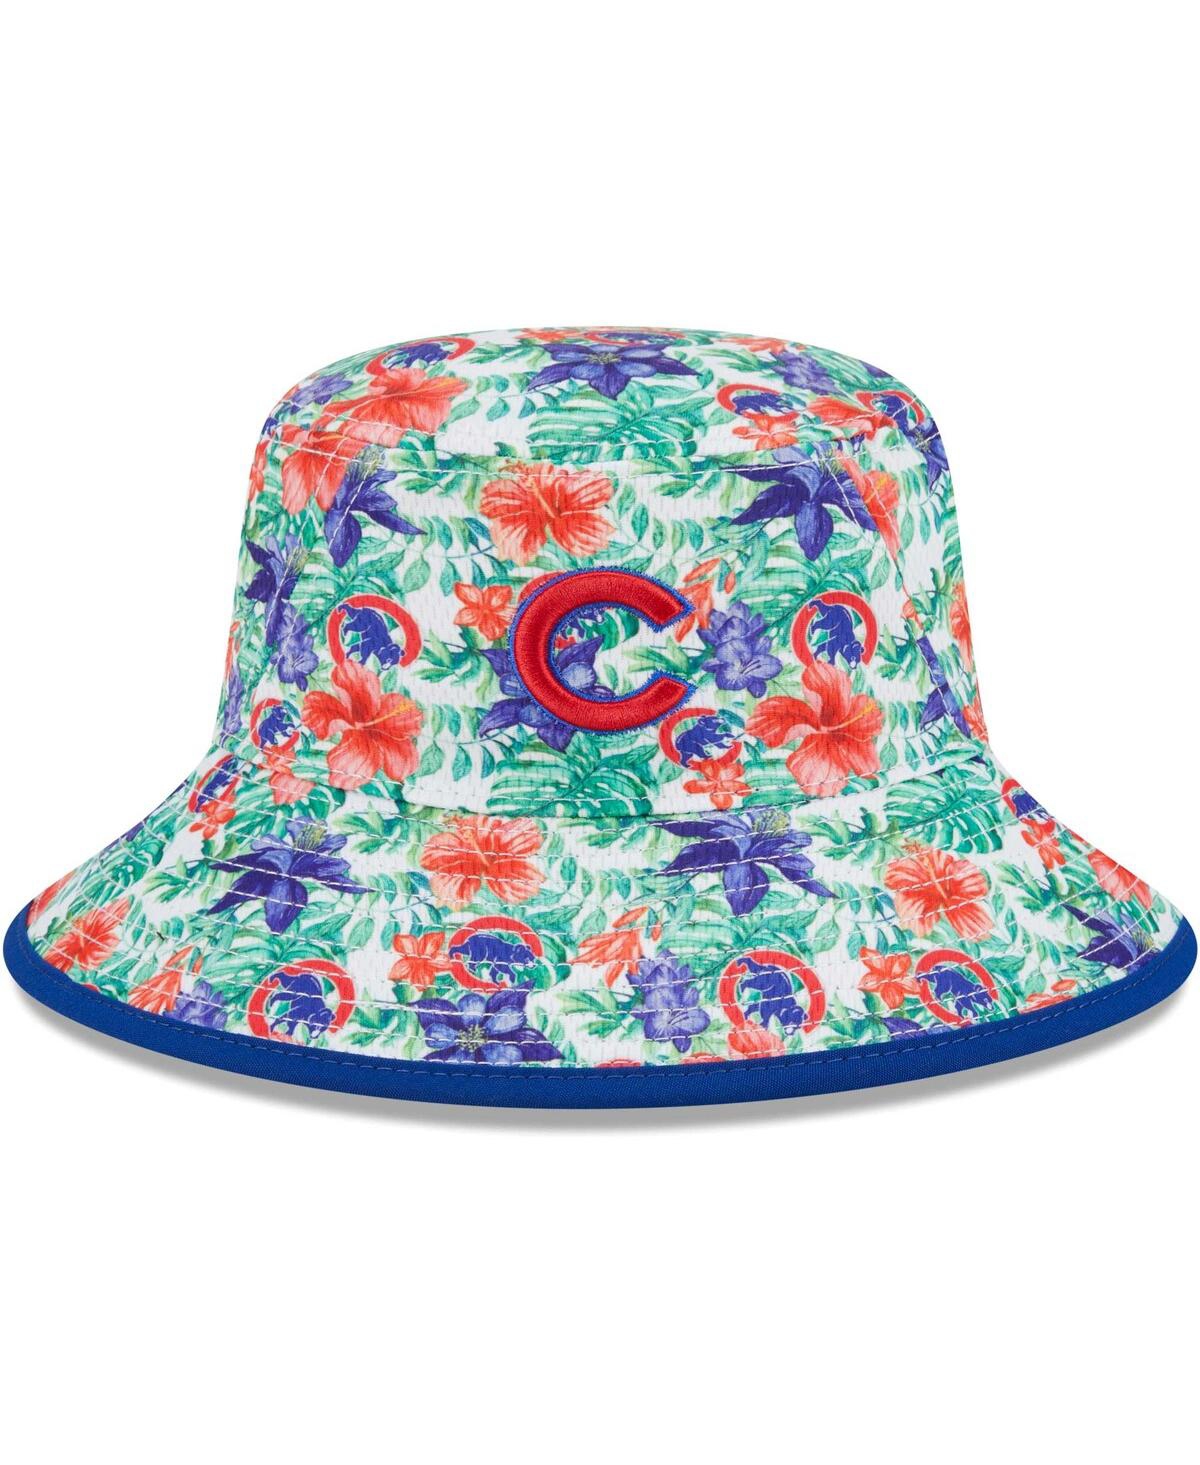 New Era Men's  Chicago Cubs Tropic Floral Bucket Hat In Royal